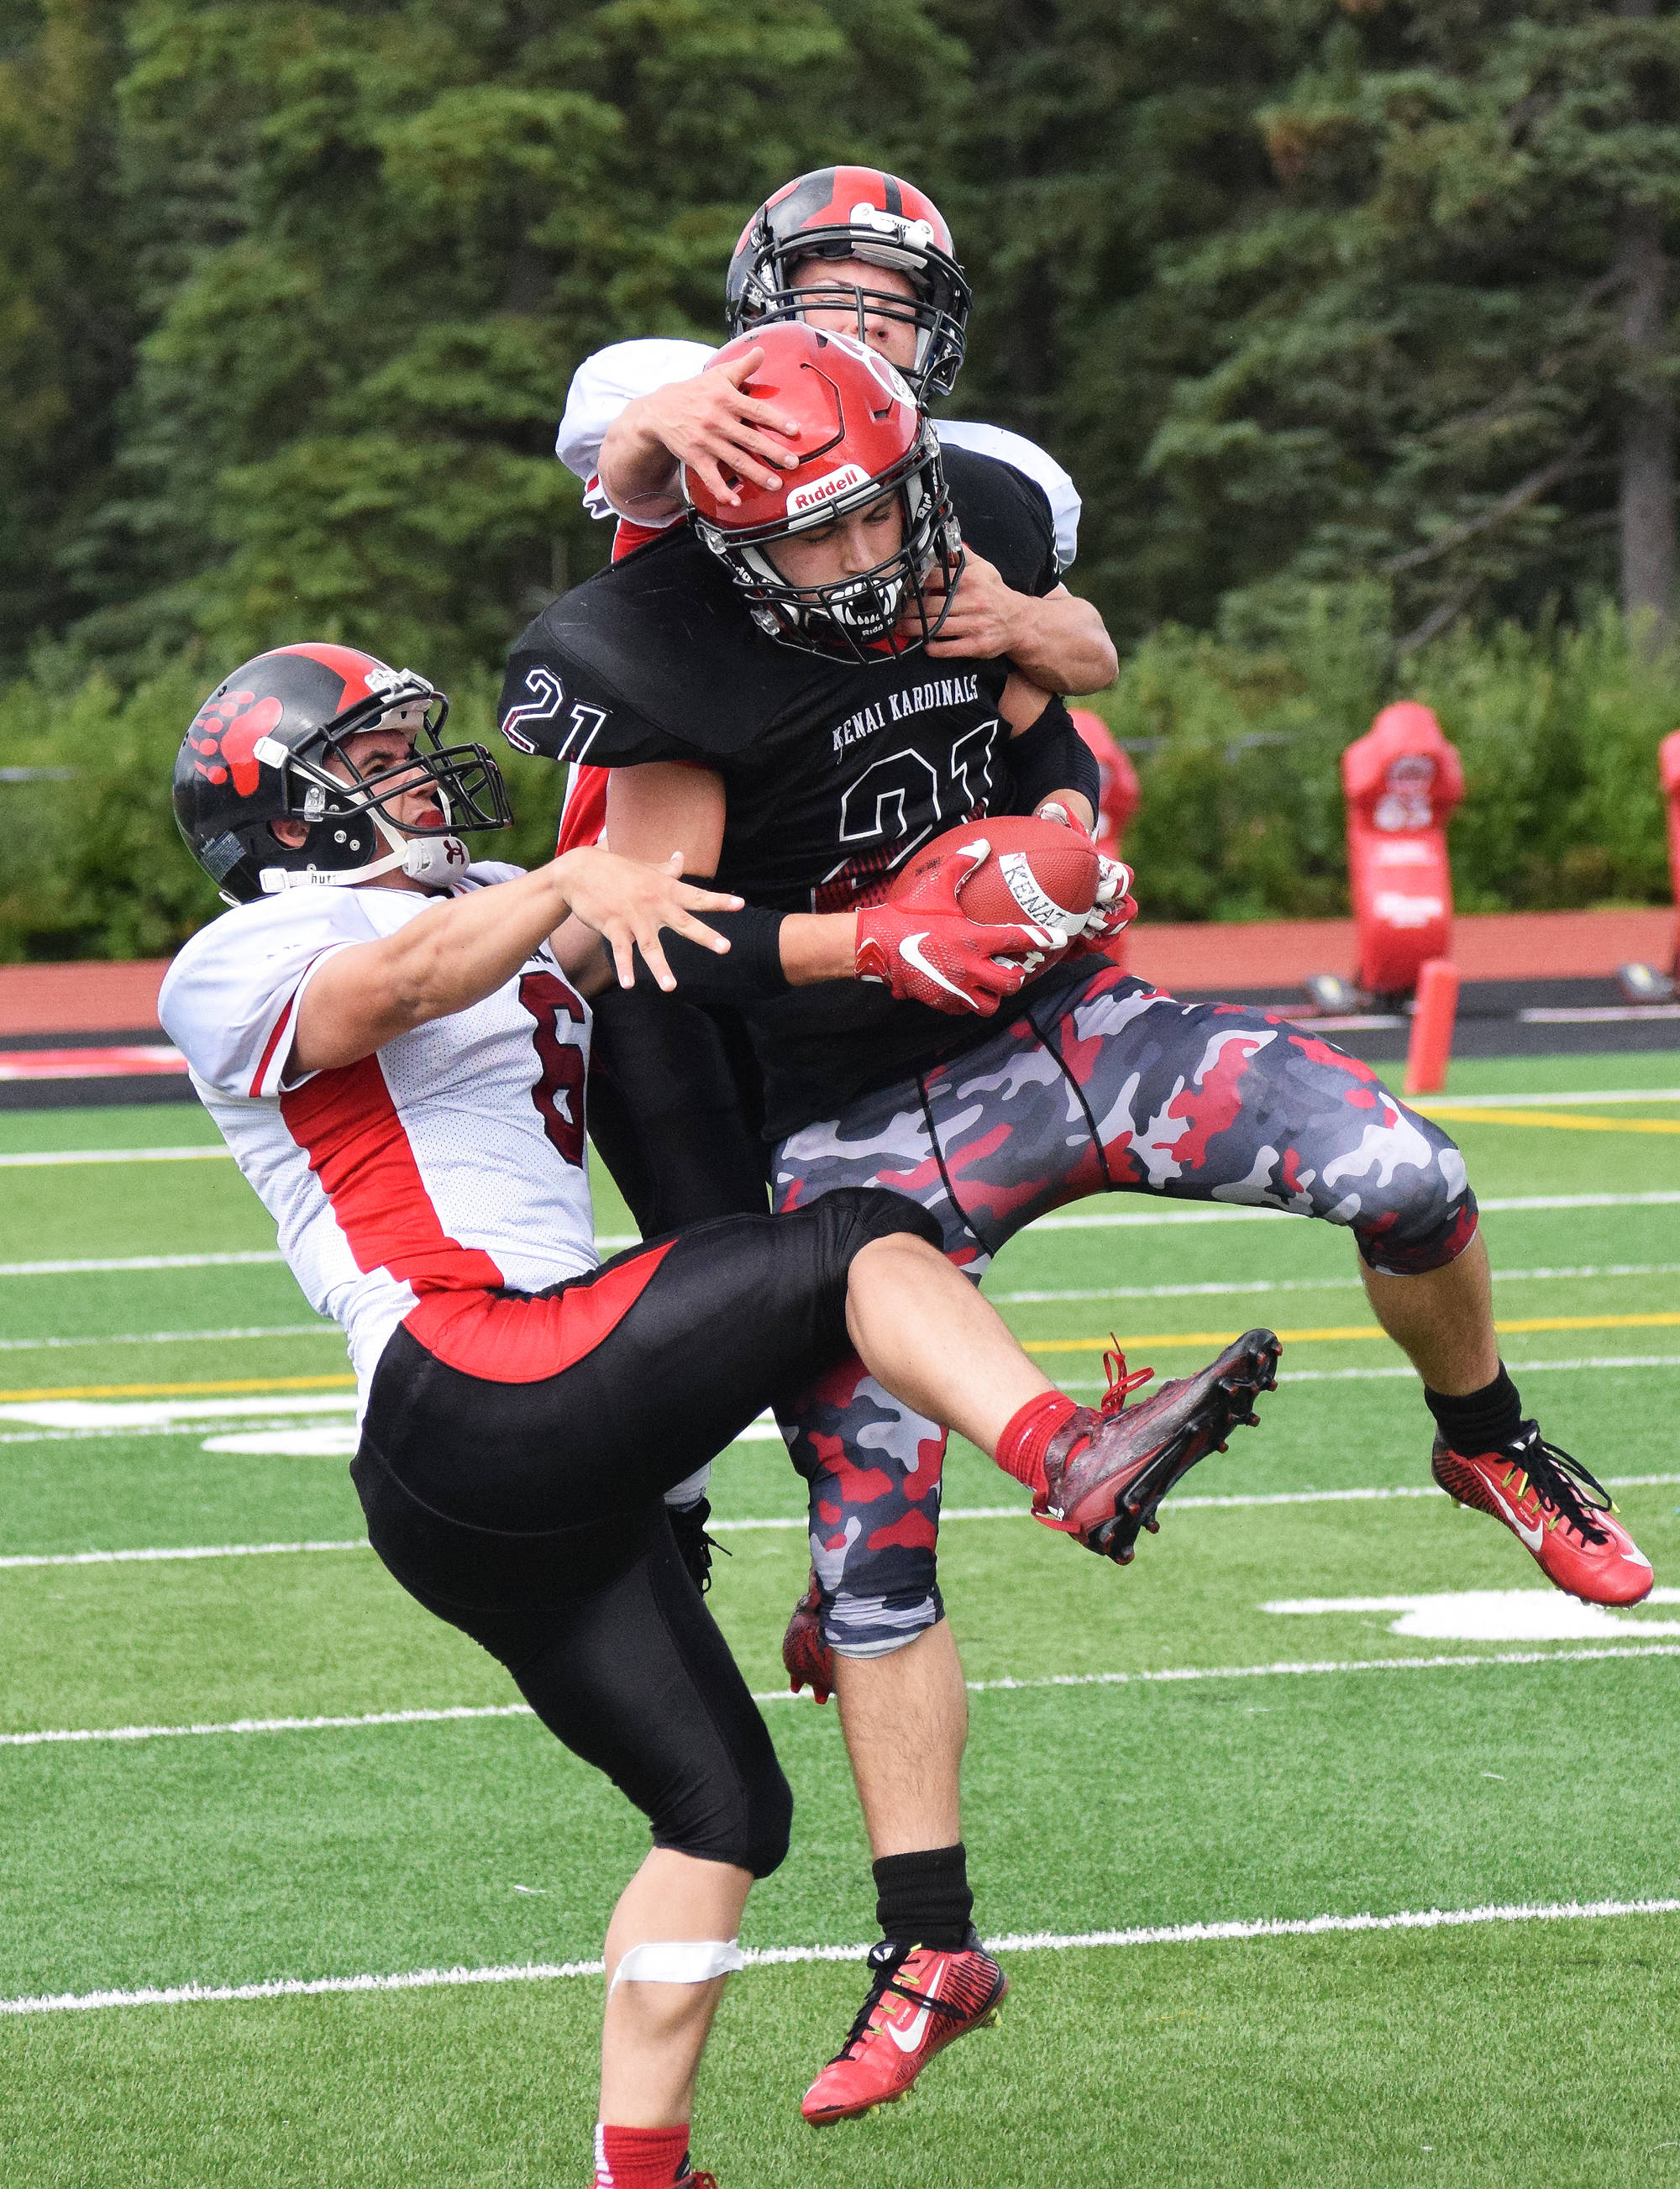 Kenai Central senior Zack Tuttle hauls in a long pass from quarterback Connor Felchle as Juneau defensive backs Donavin McCurley (right) and Liam Van Sickle hang on, Saturday afternoon at Ed Hollier Field in Kenai. (Photo by Joey Klecka/Peninsula Clarion)